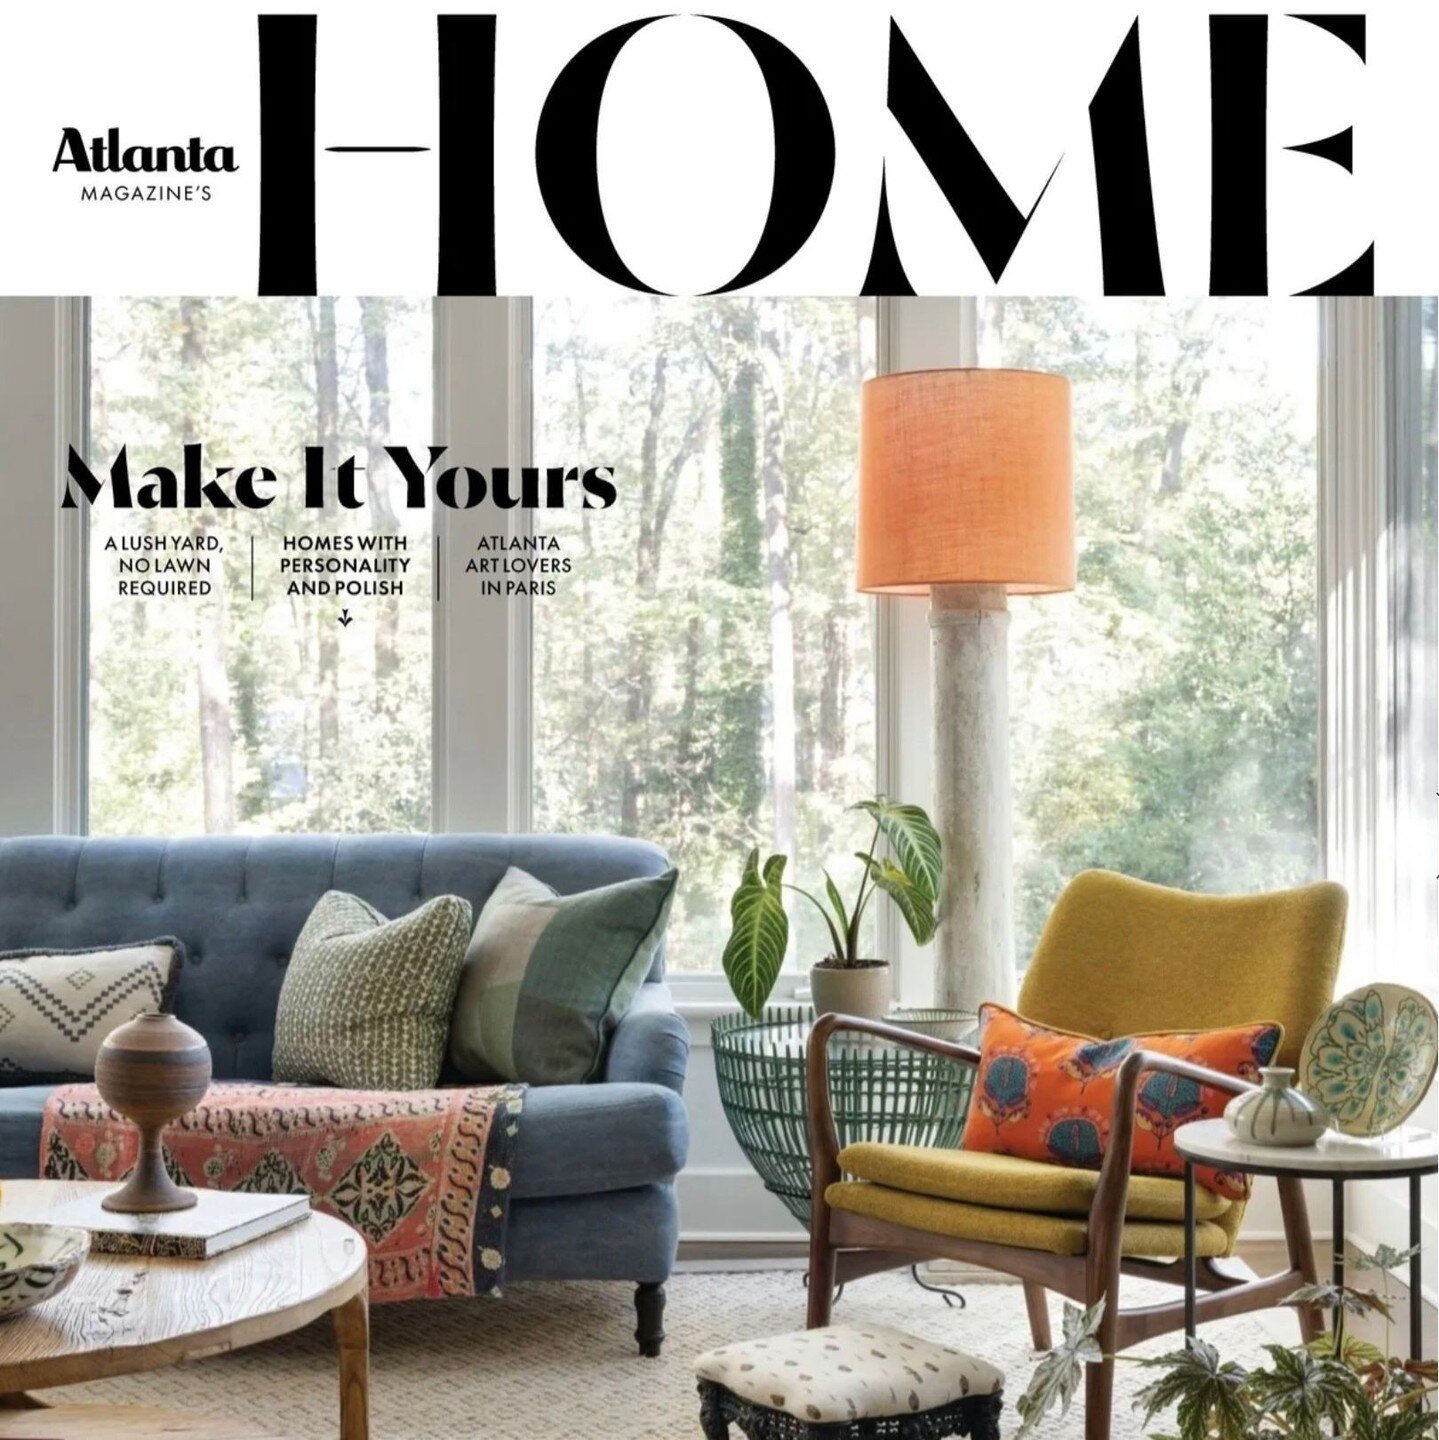 Massive, heartfelt thanks to @atlantamagazine's HOME and @lisamowry for the lovely feature in their Spring issue of our #ckprojectridgewoodtreehouse in Athens, GA. Gracing the cover was the delicious cherry on top! 🍒⁠
⁠
&quot;It's so much more satis